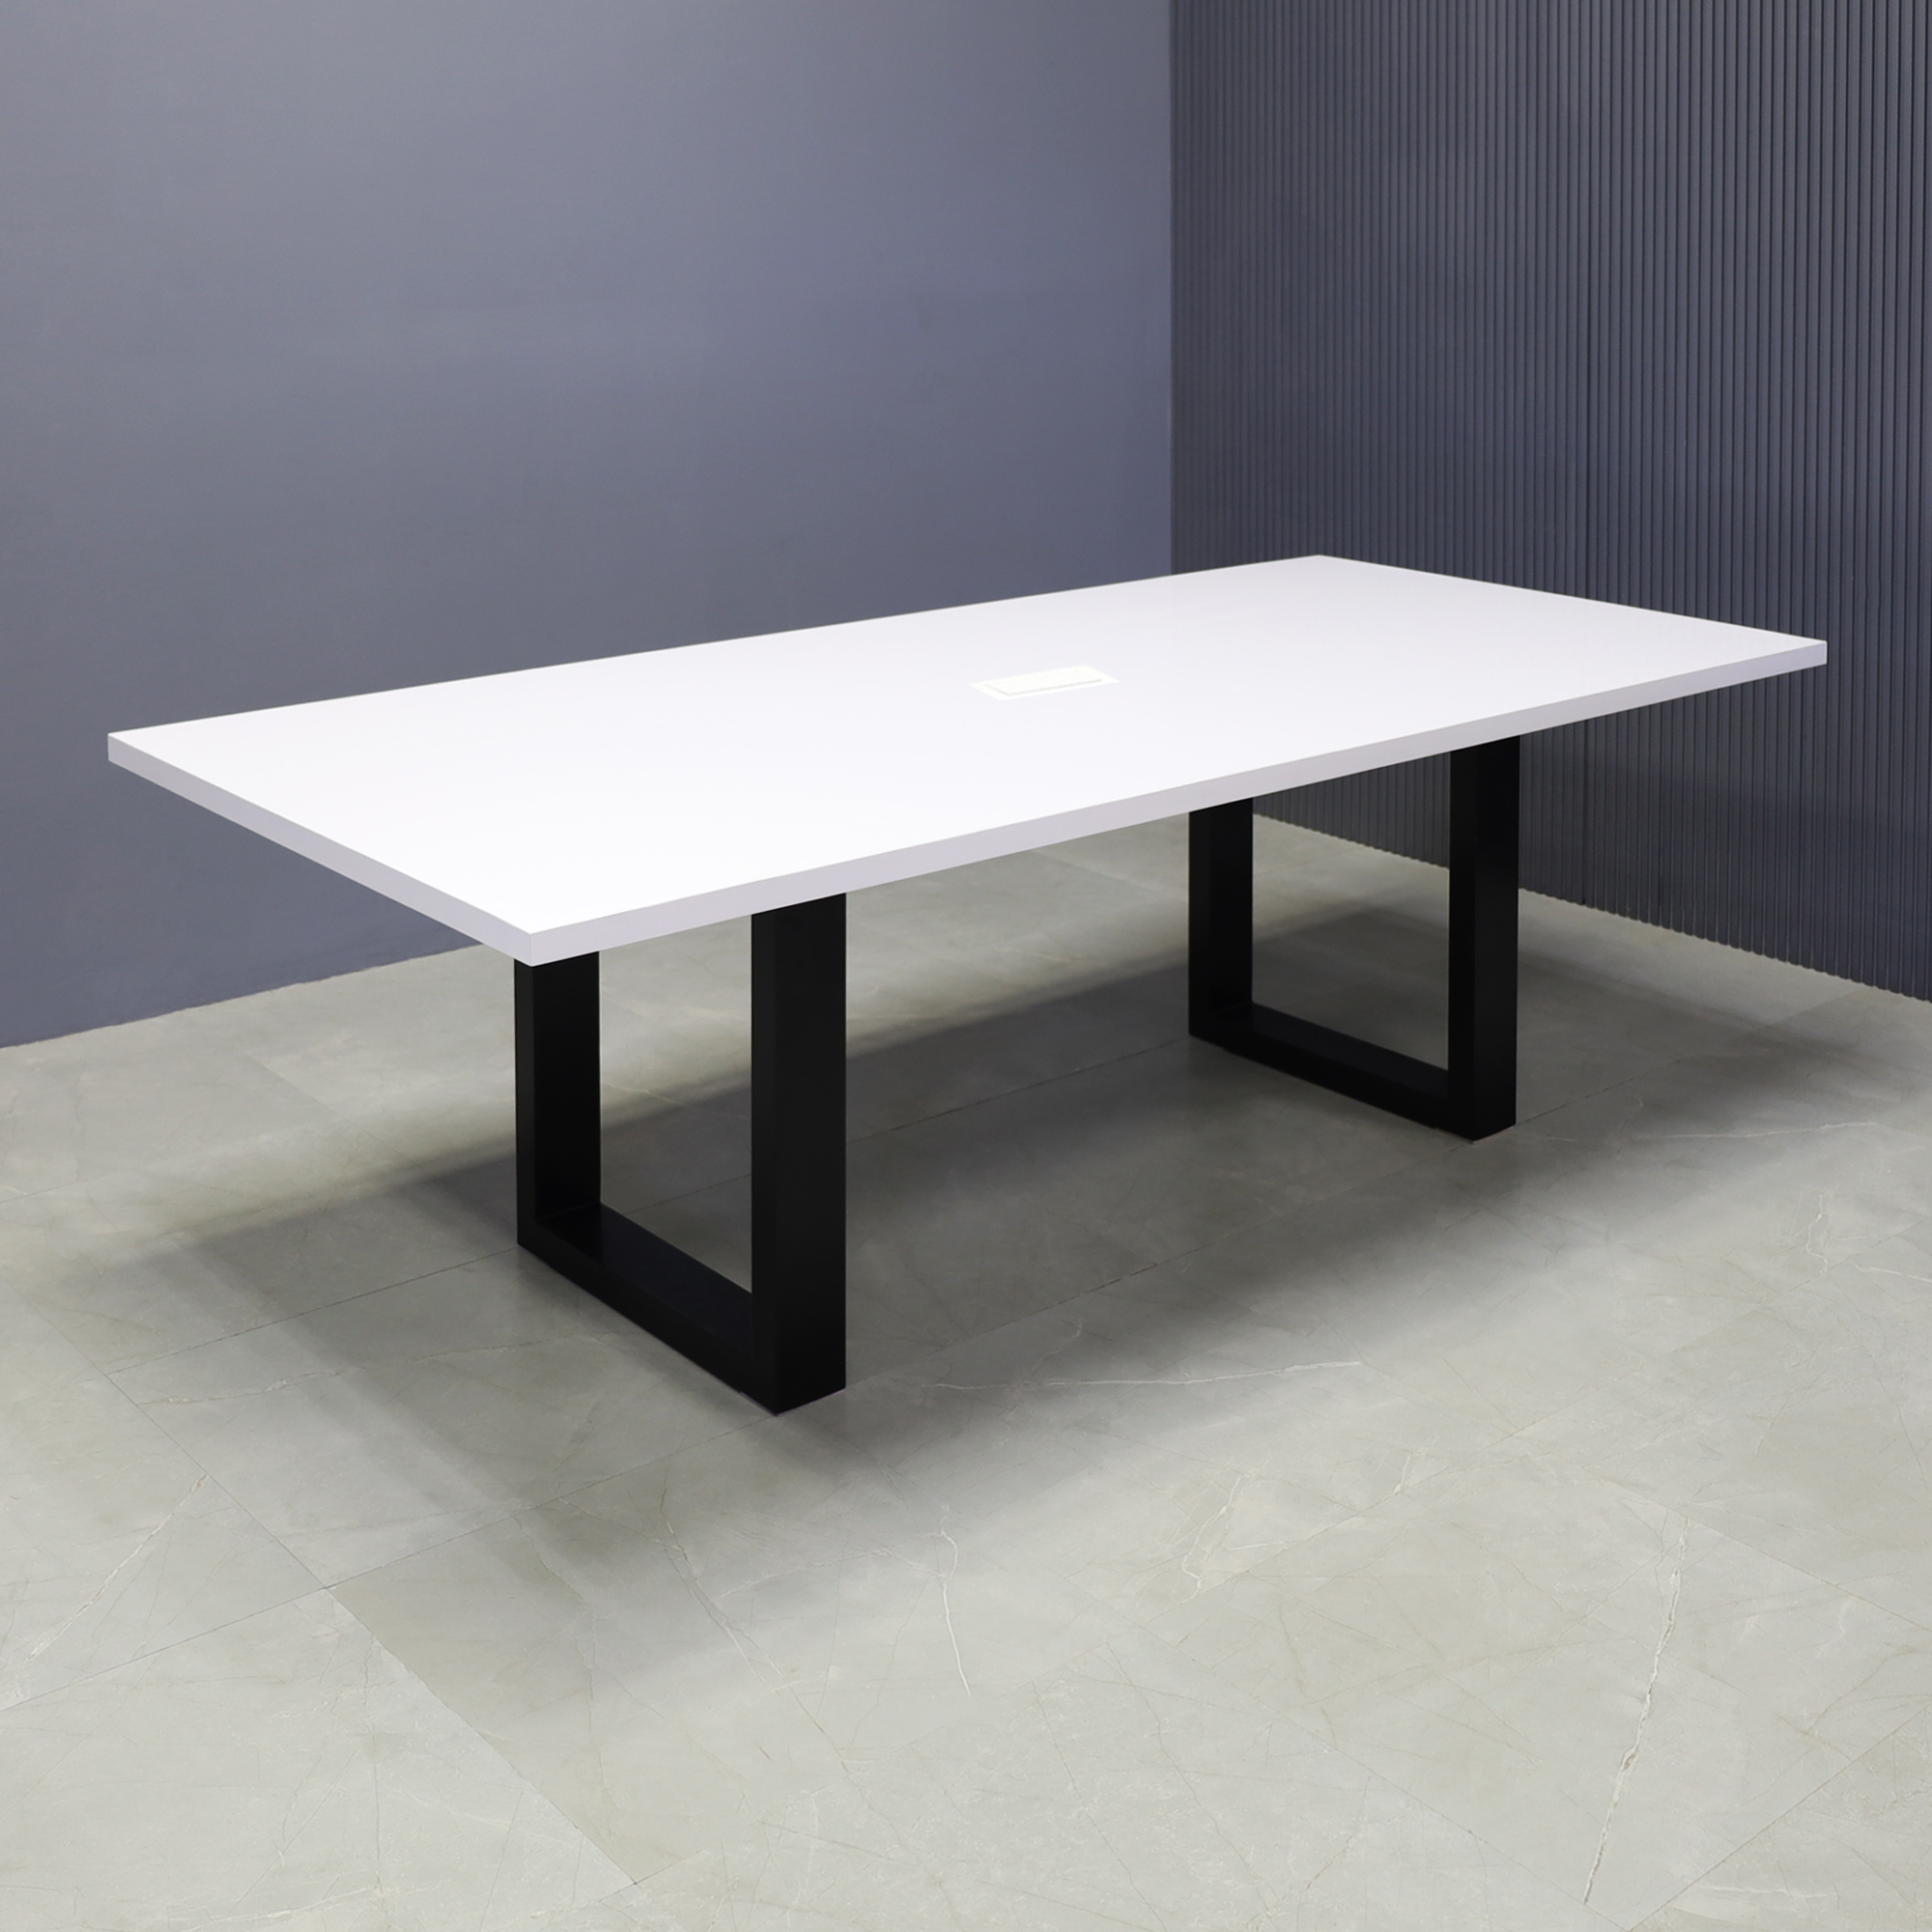 90-inch Newton Rectangular Conference Table in white gloss laminate top and black metal u base, with white MX2 powerbox, shown here.